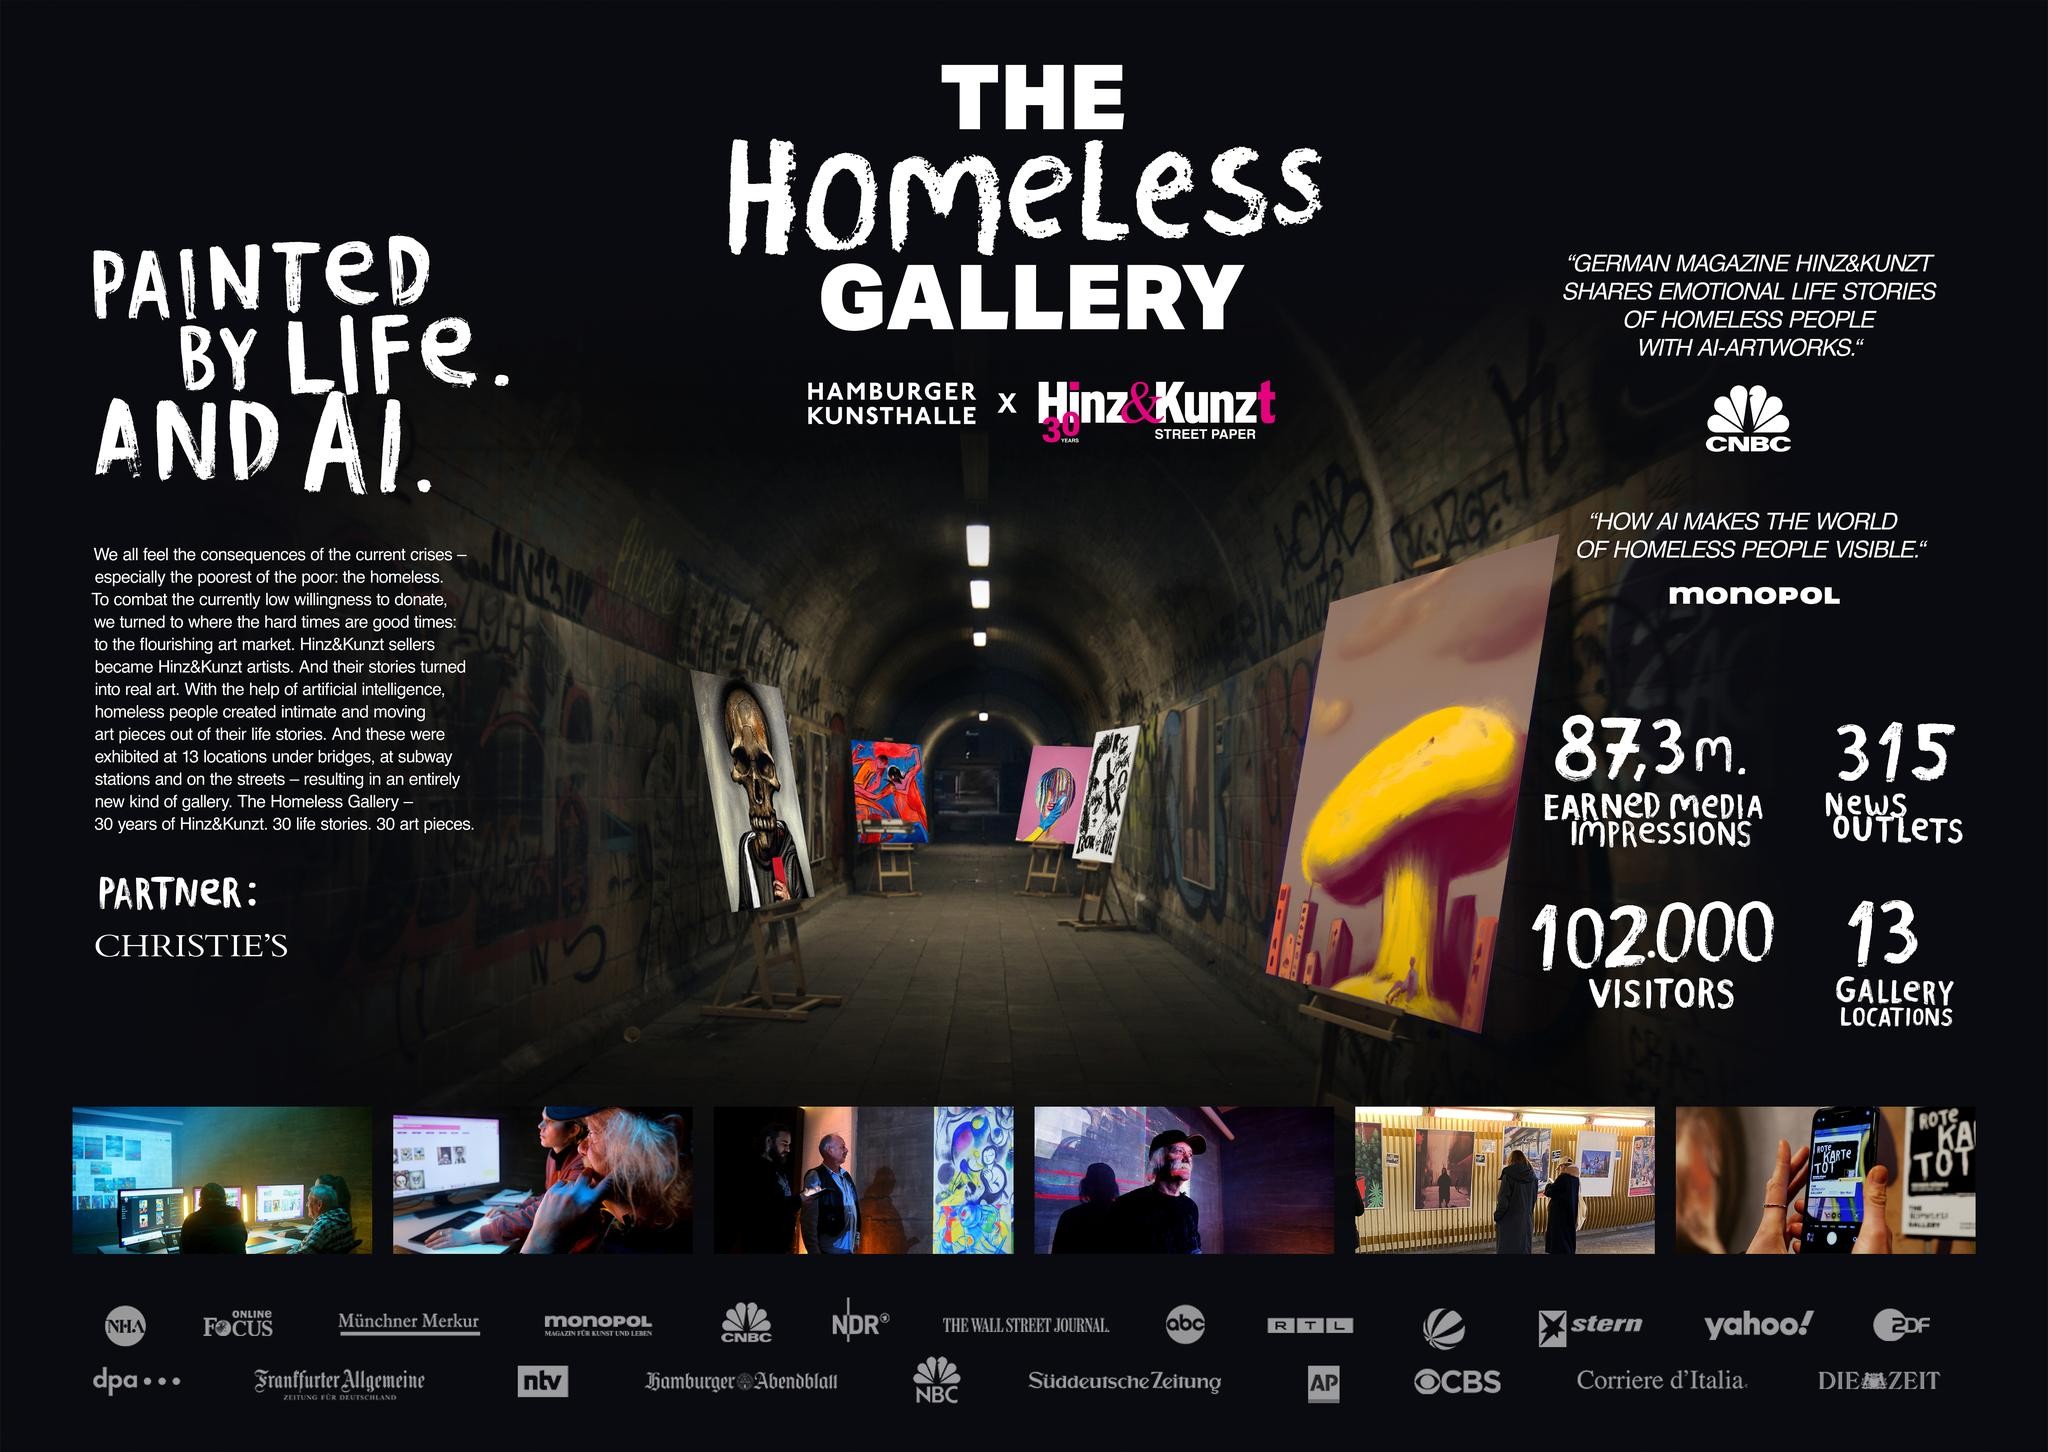 THE HOMELESS GALLERY